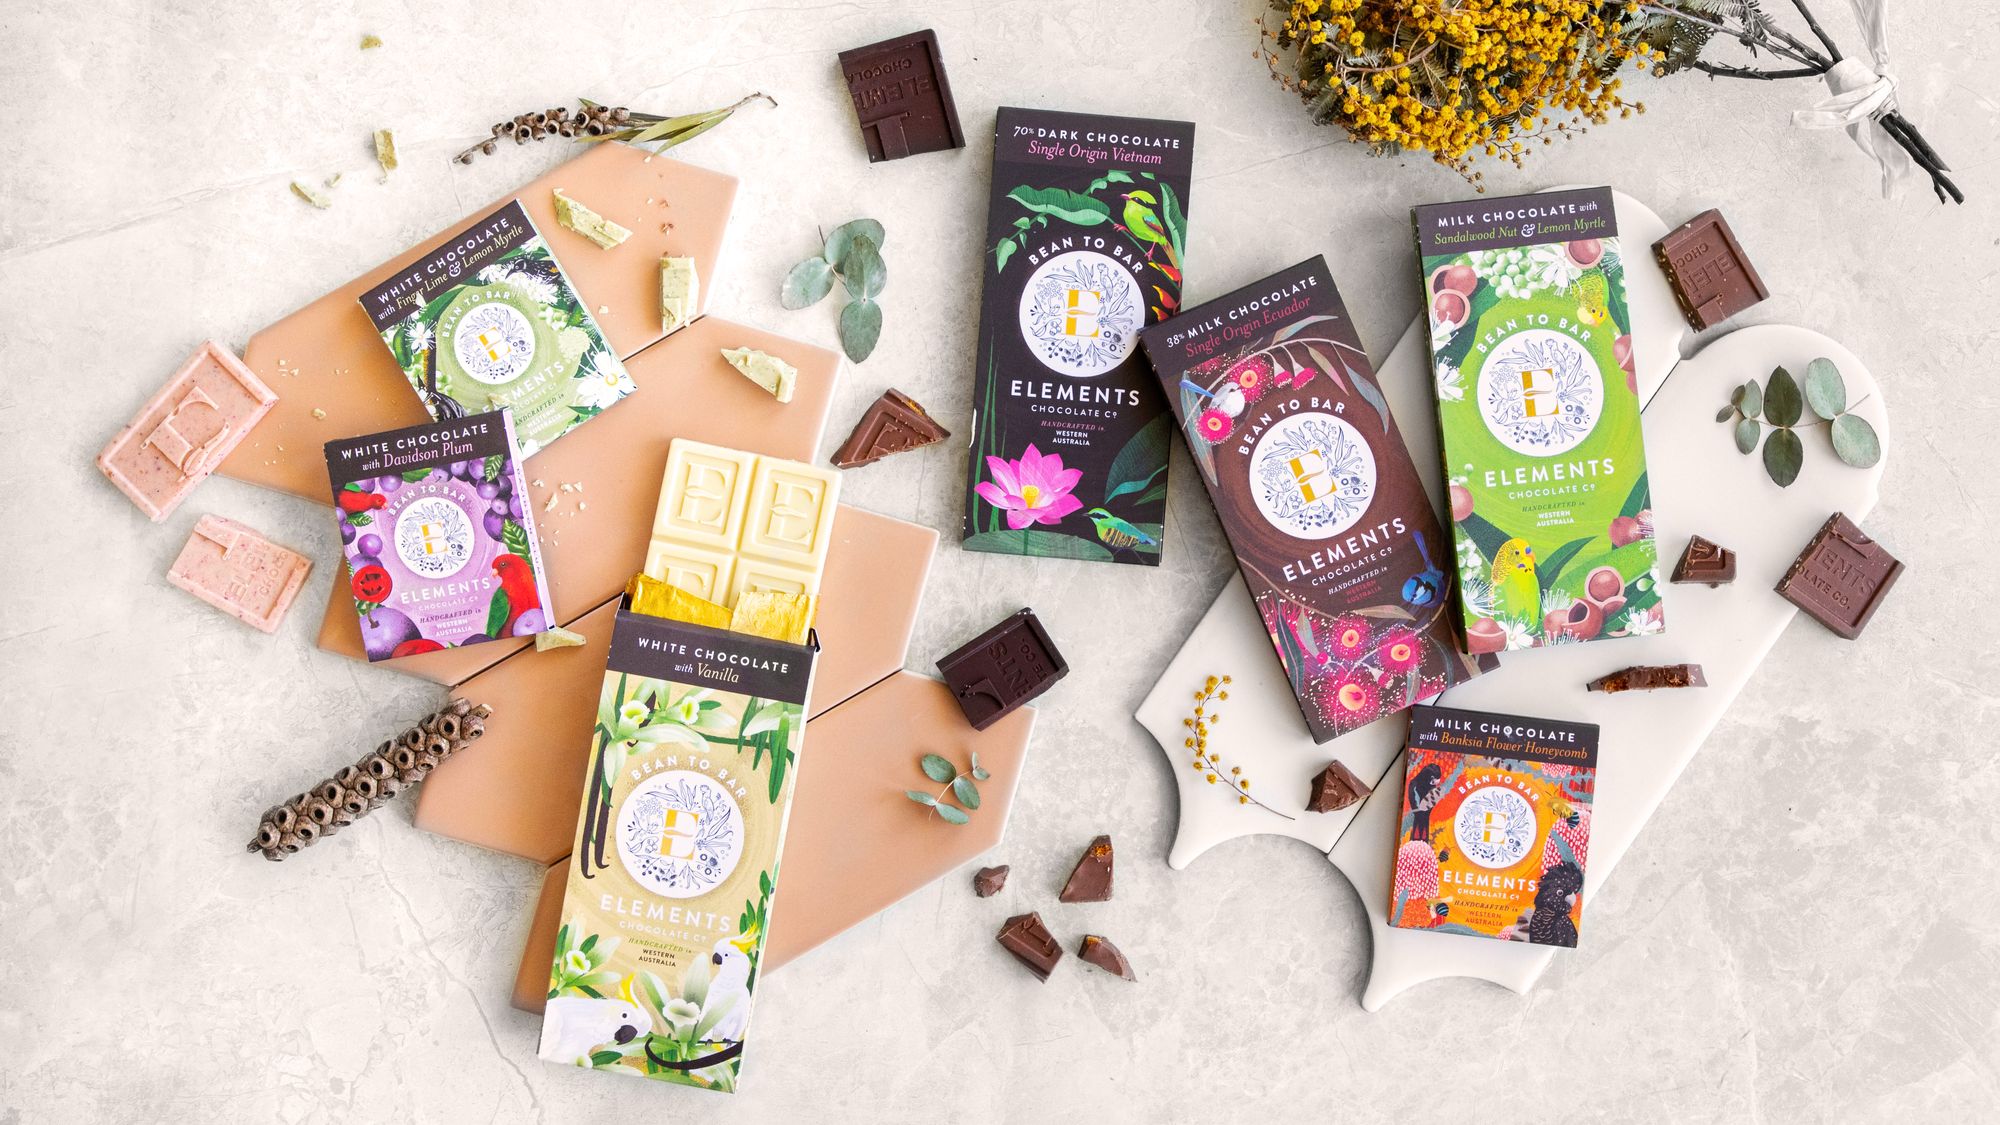 Elements Chocolate Co chocolate bars spread out with different flavours.